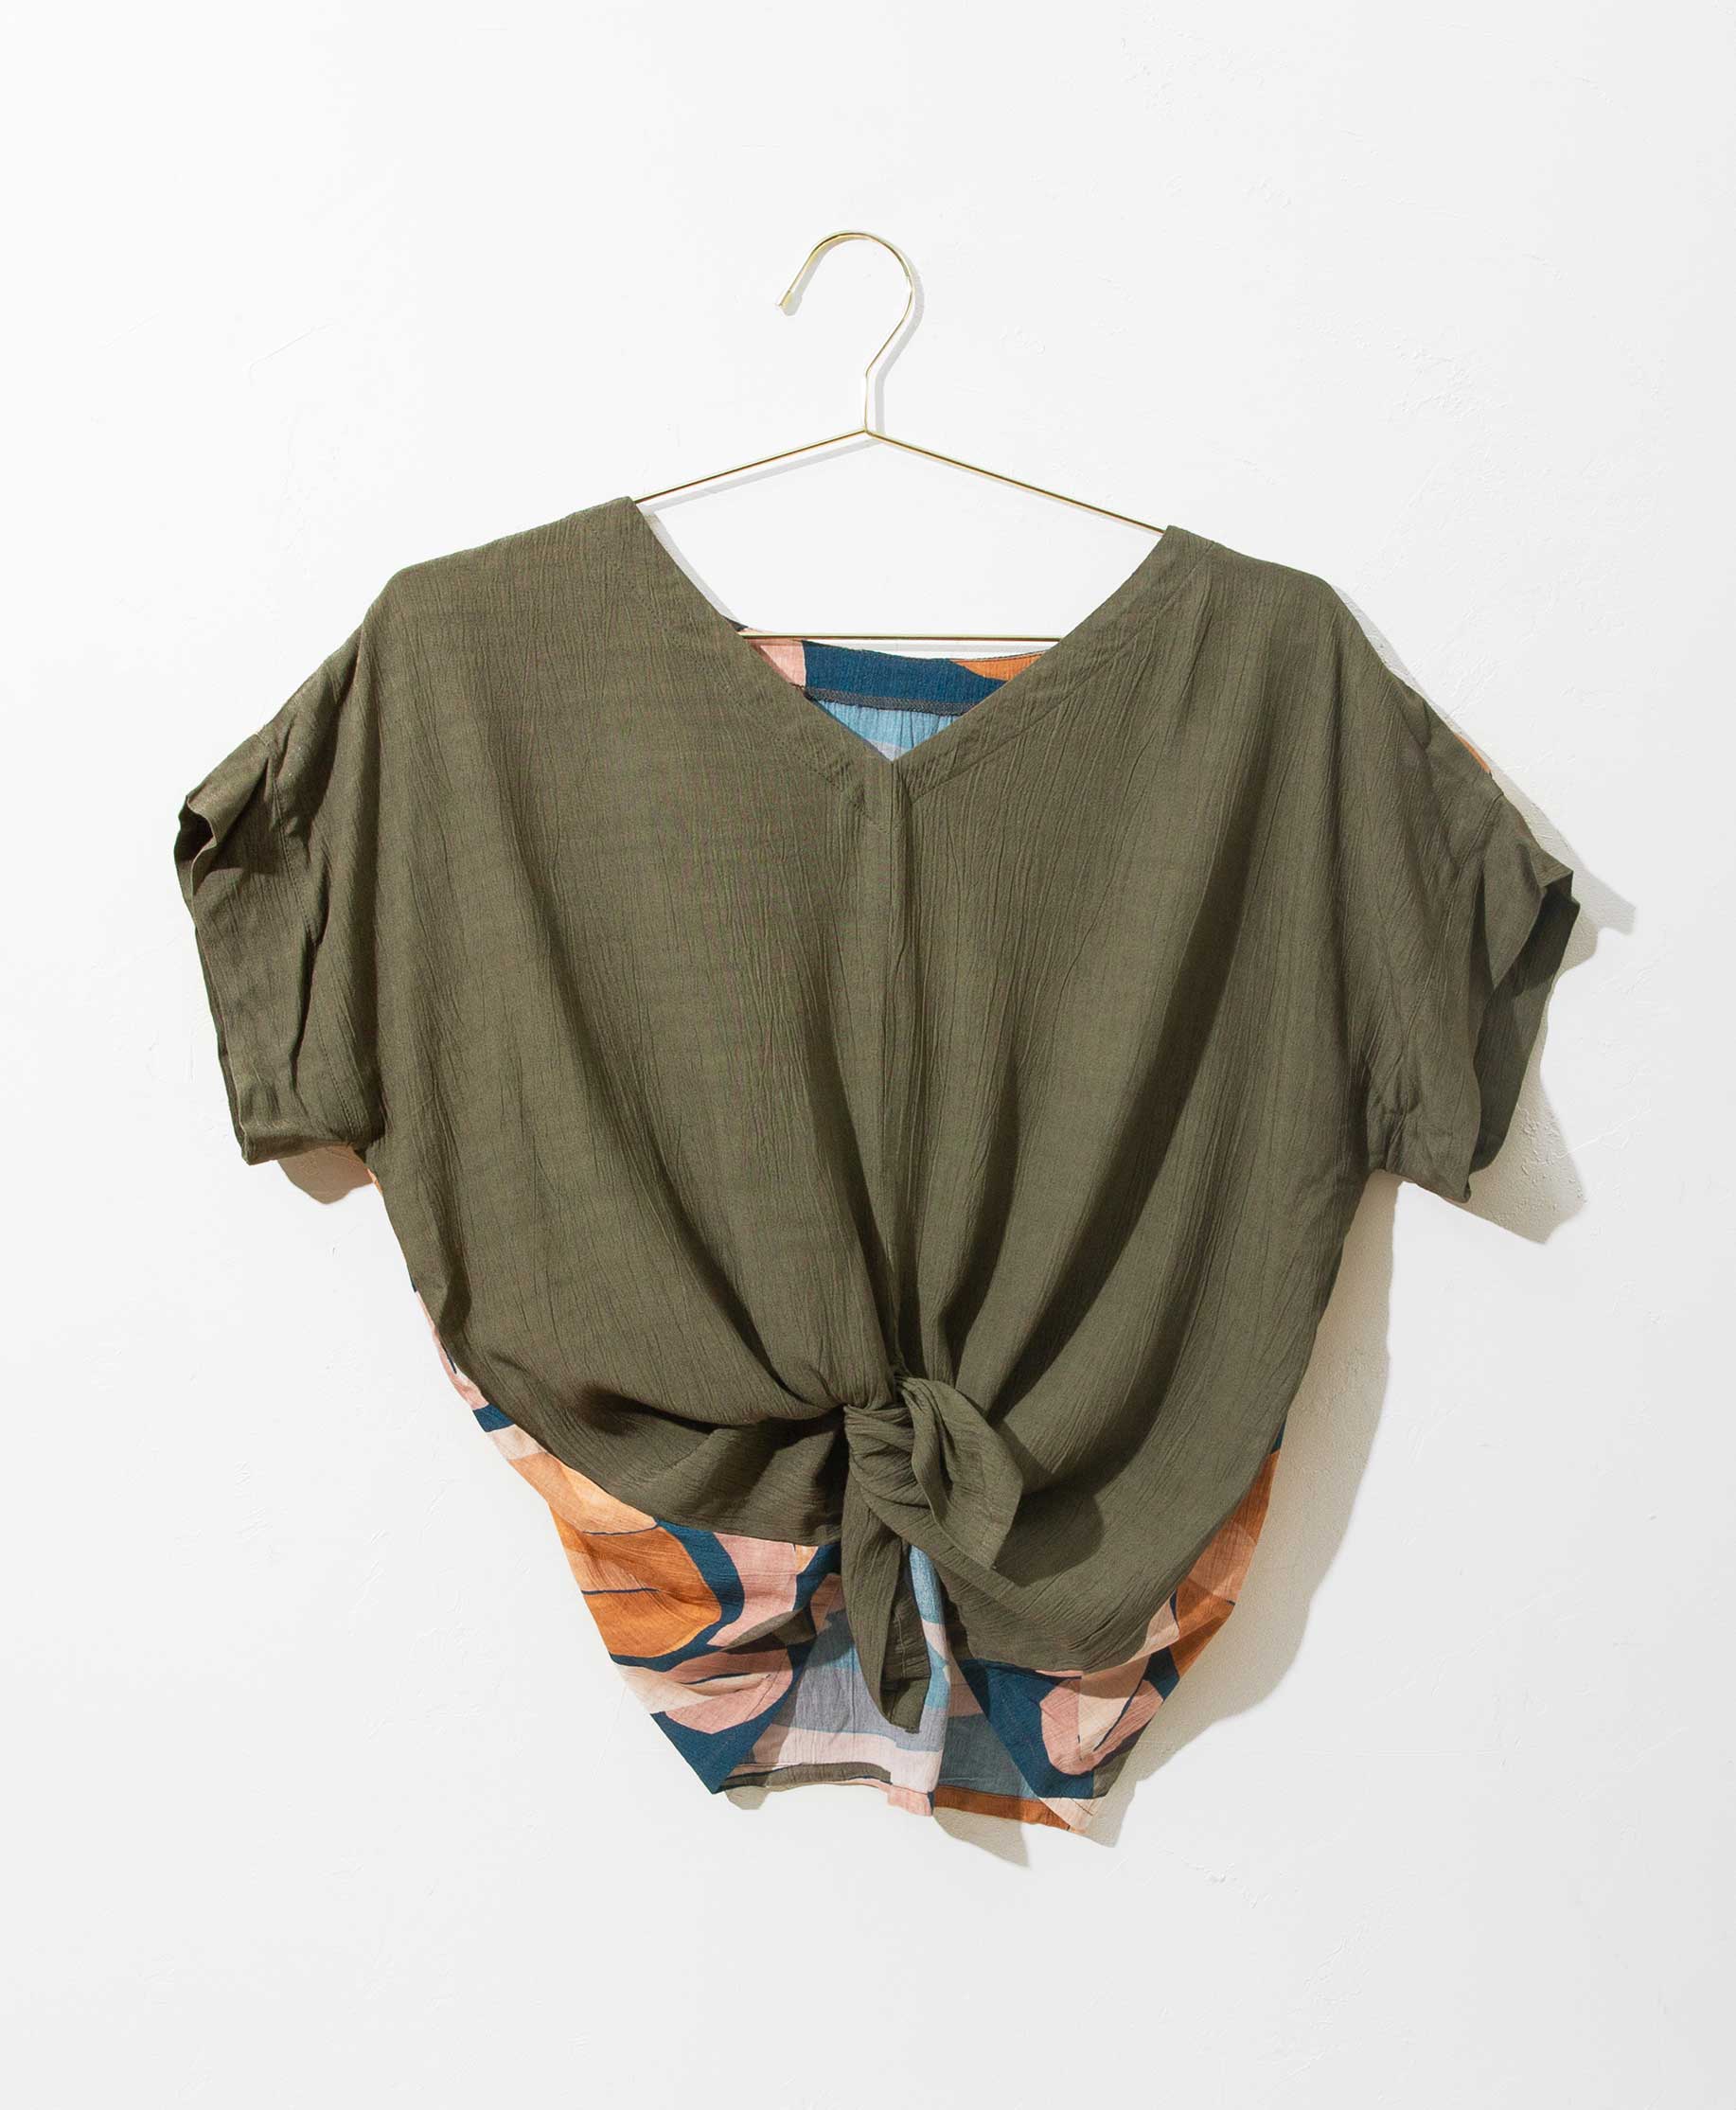 So many looks from one simple design. Wear it tied or untied for extra versatility. With our Obuvumu pattern on one side and solid olive on the other, you can style this reversible piece to suit your mood or your destination. The easy, flattering fit is another reason you'll be reaching for this blouse whether you're working from home or are on the go.